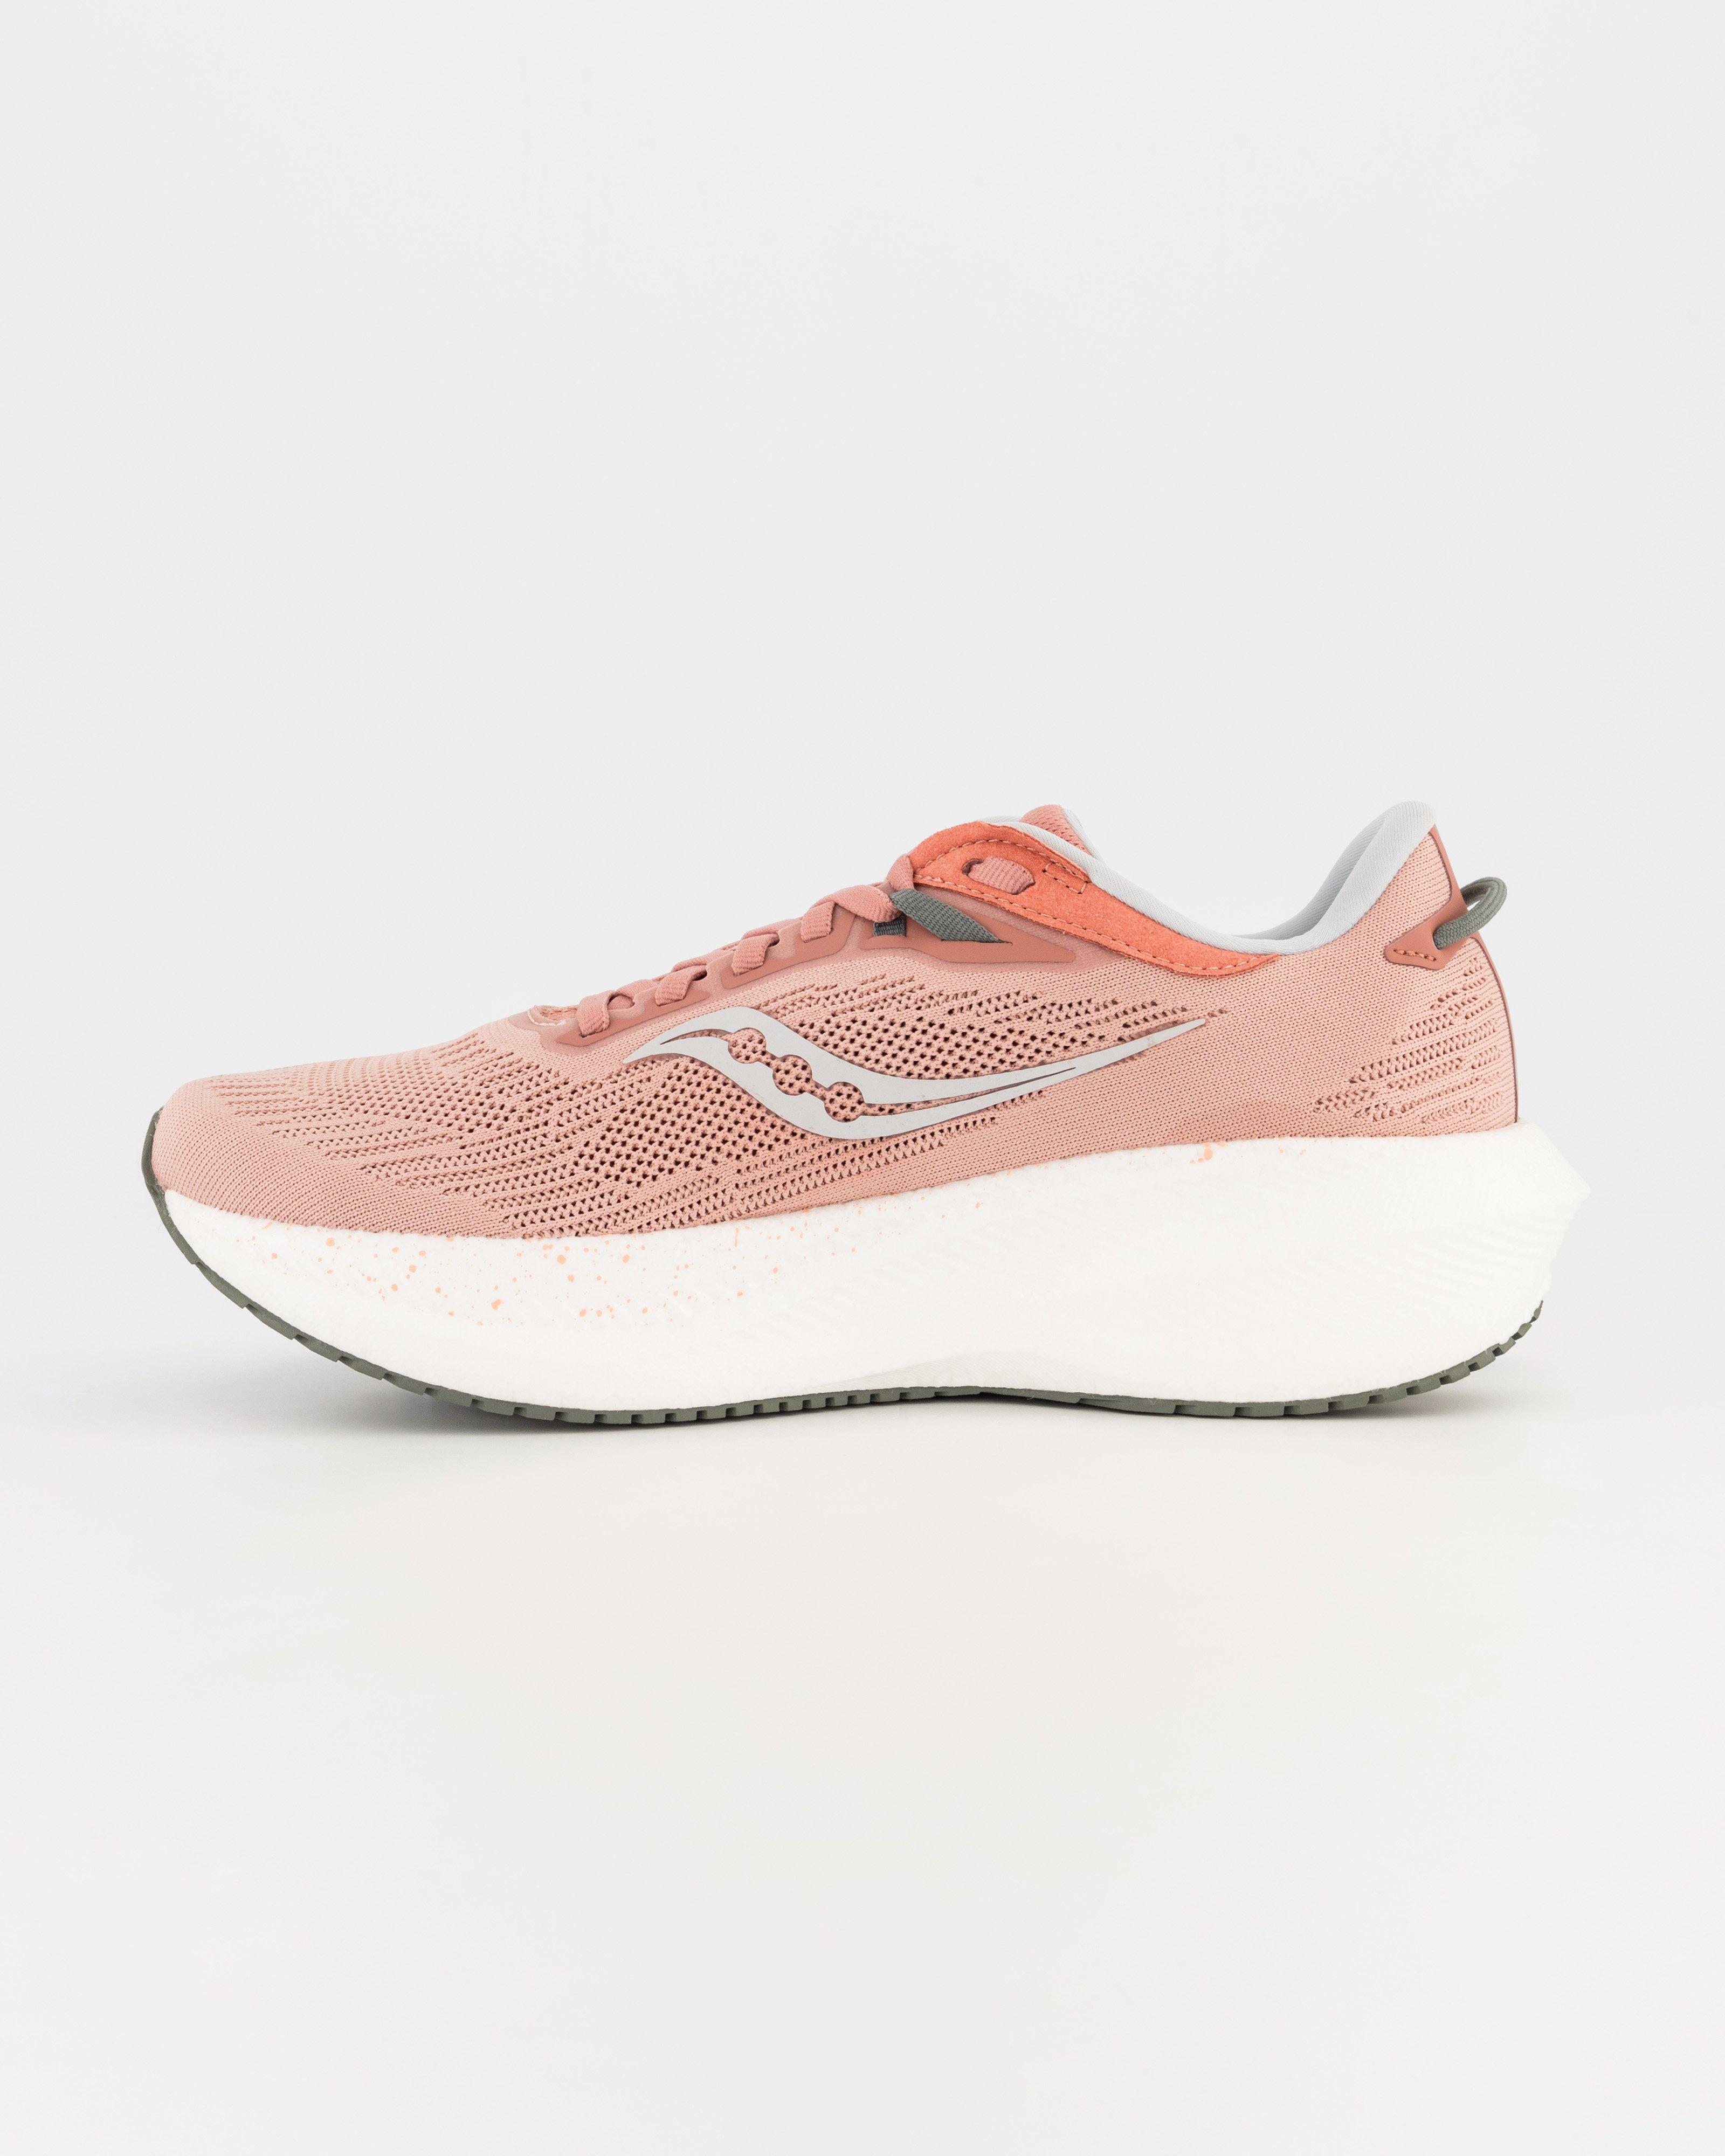 Saucony Women's Triumph 21 Road Running Shoes -  Dusty Pink